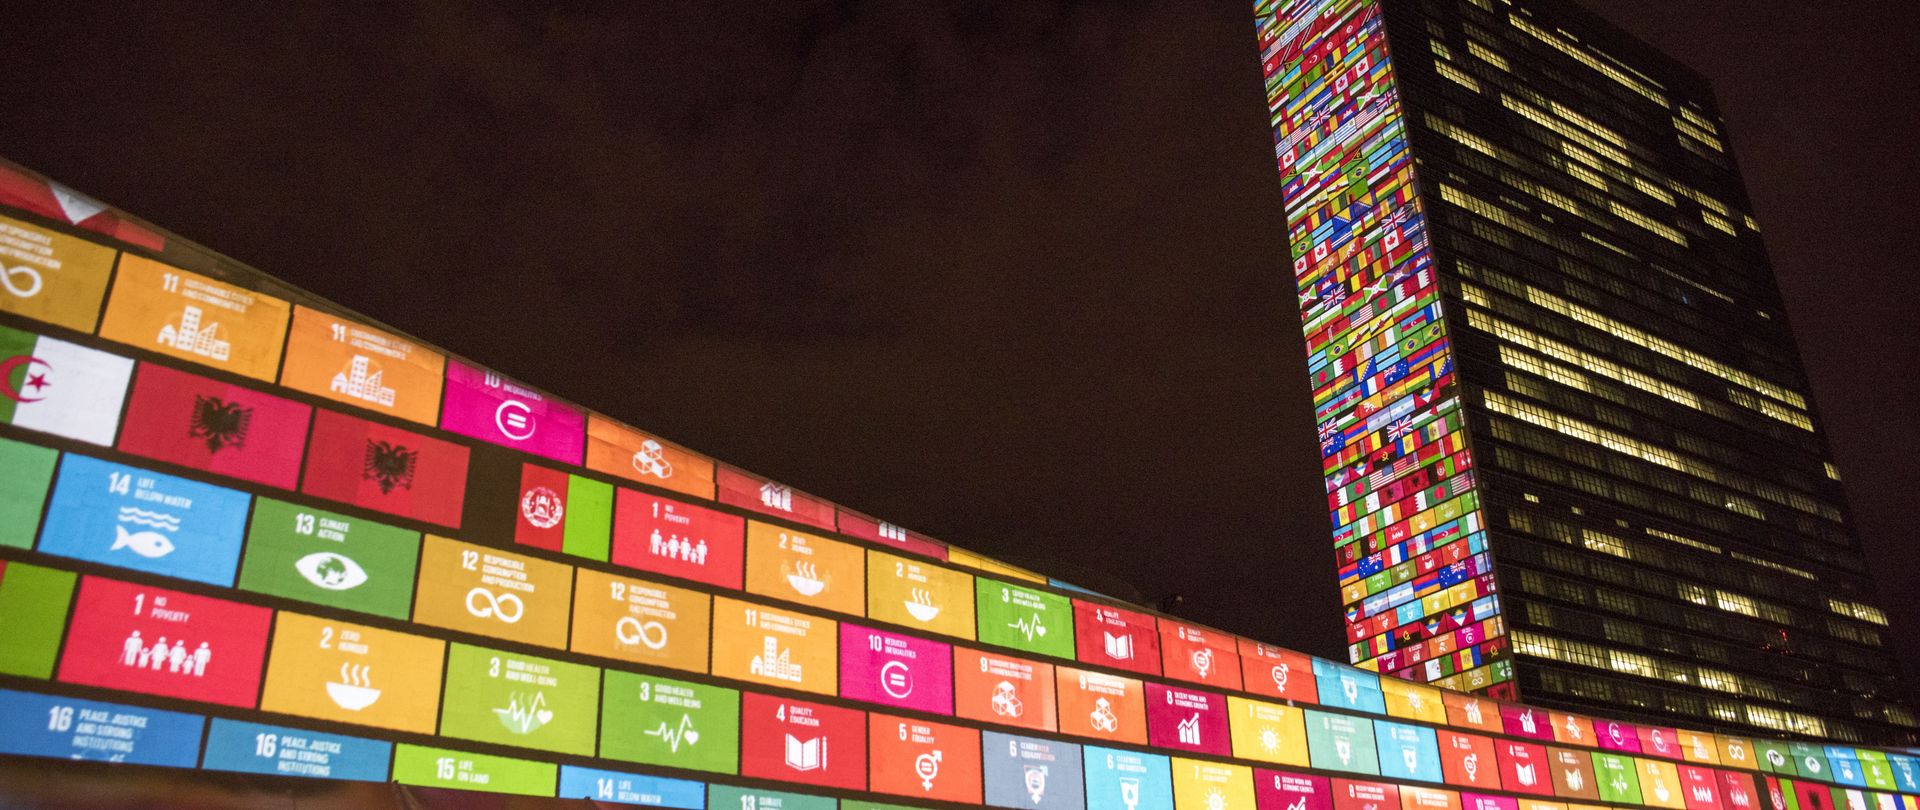 SDG Projections: Massive scale projections and peoples’ voices to celebrate UN70 and visually depict the 17 Global Goals